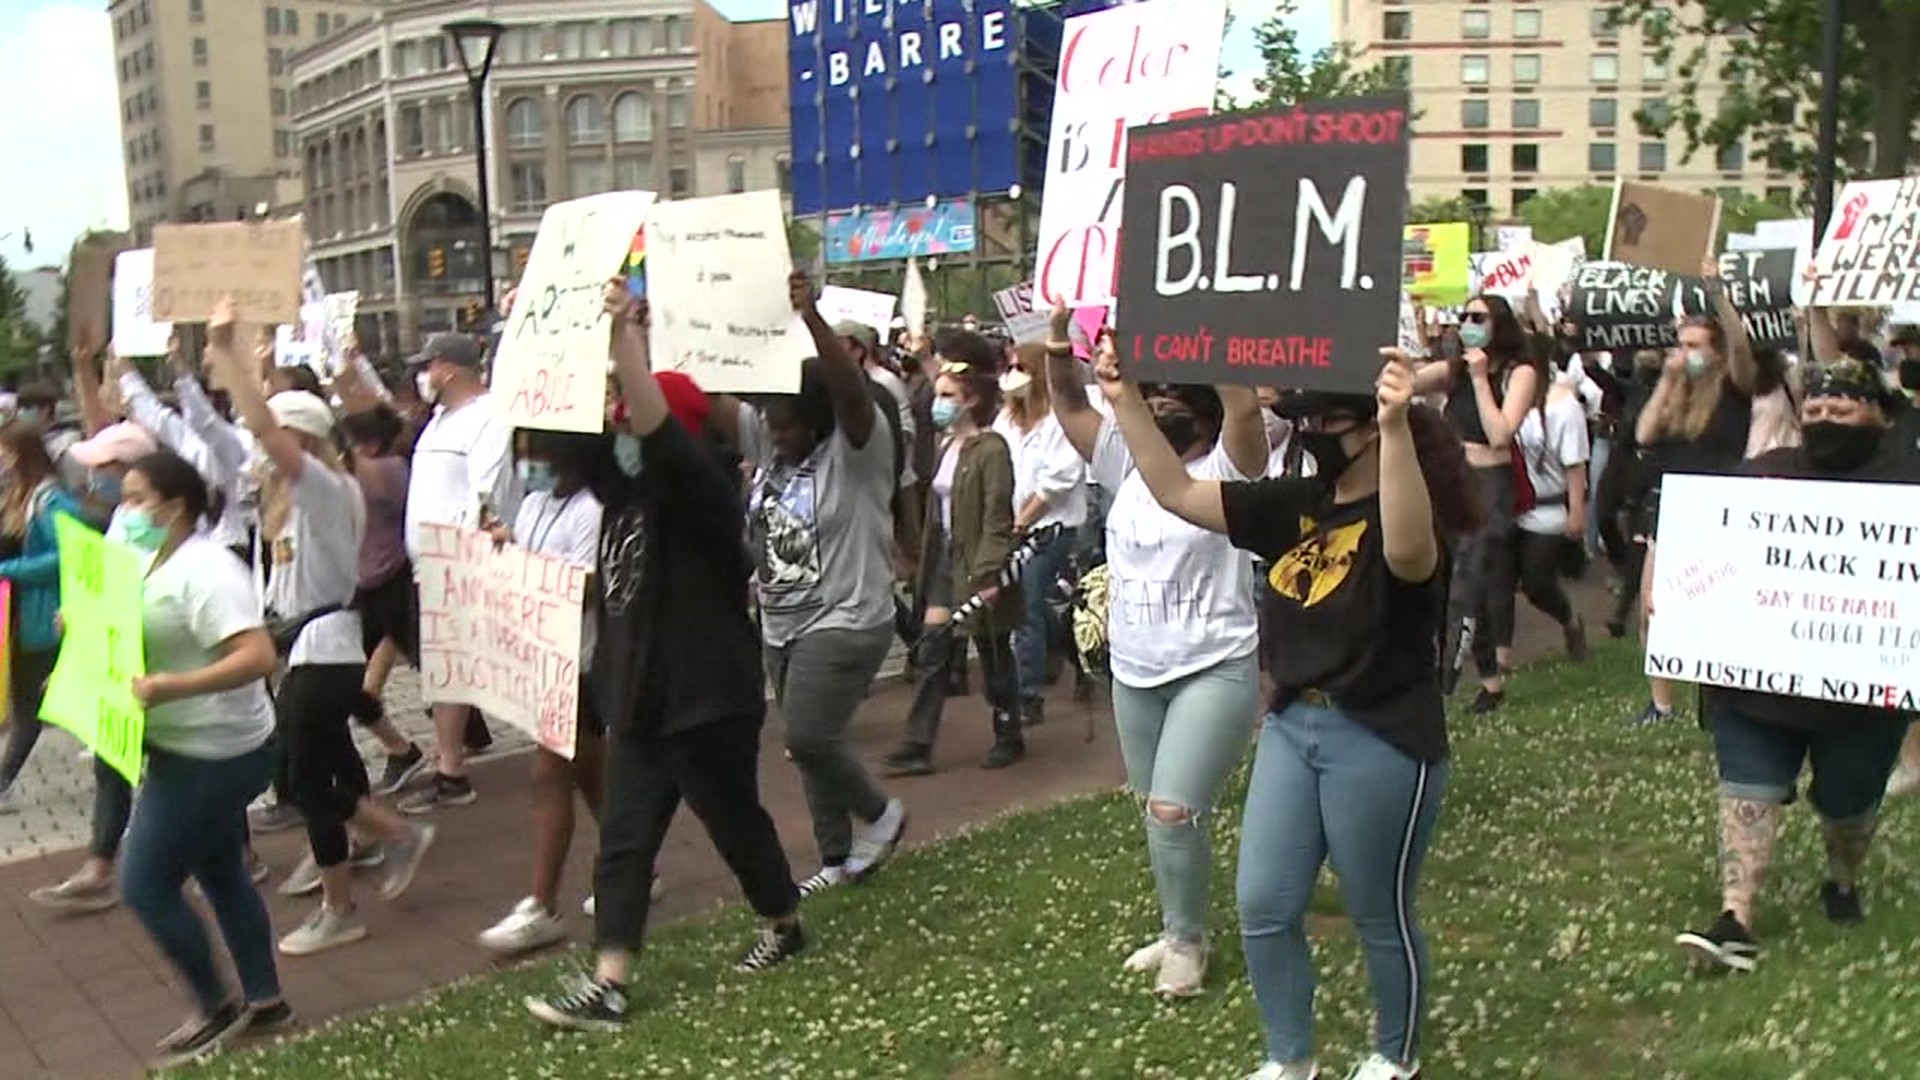 The march and rally were organized by two teens from Luzerne County.